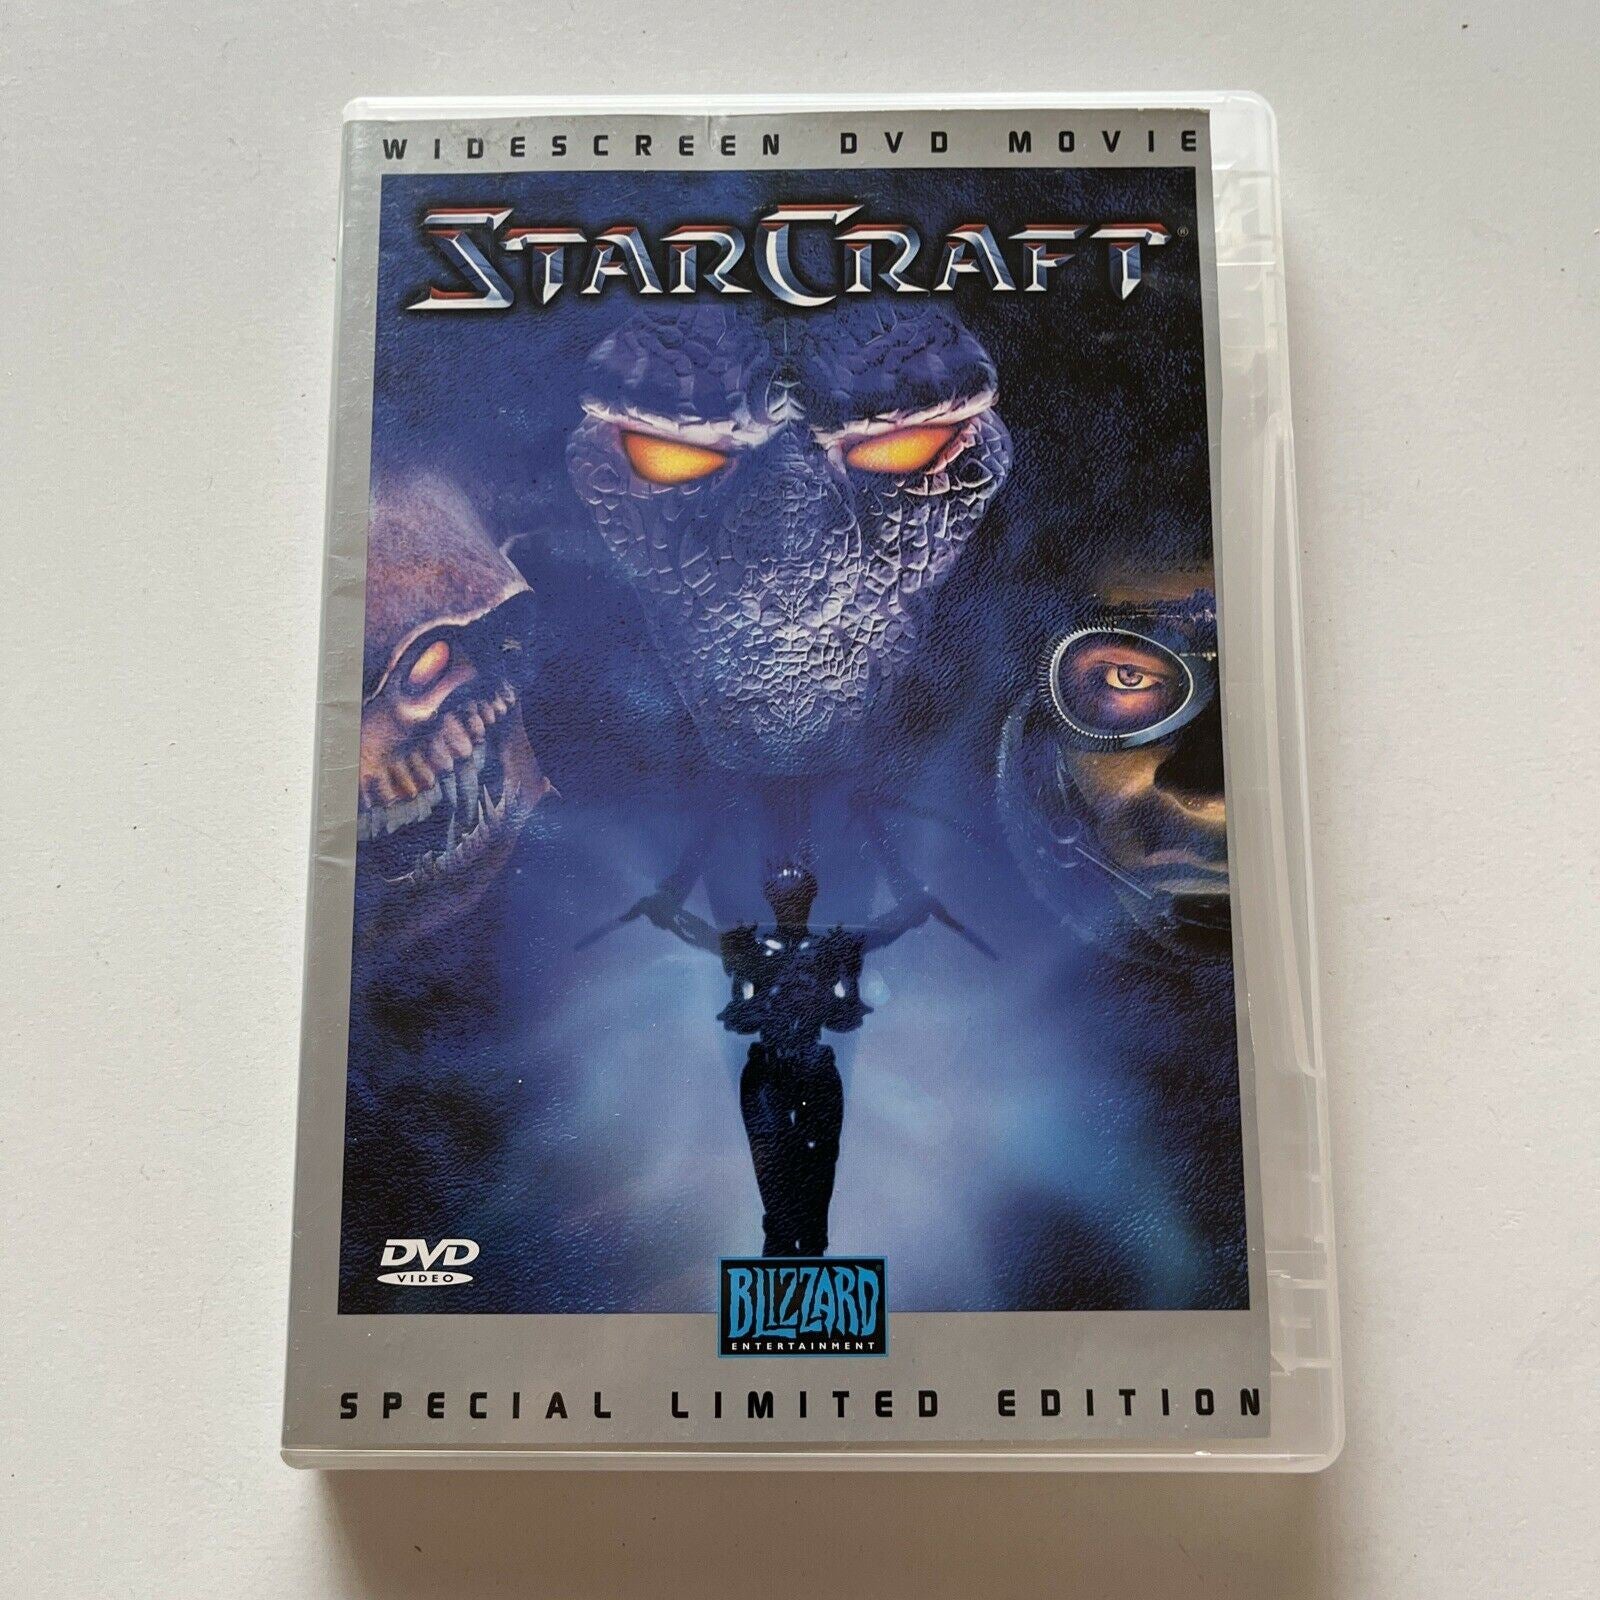 Starcraft Widescreen DVD Movie - Special Limited Edition (DVD, 2001 ...